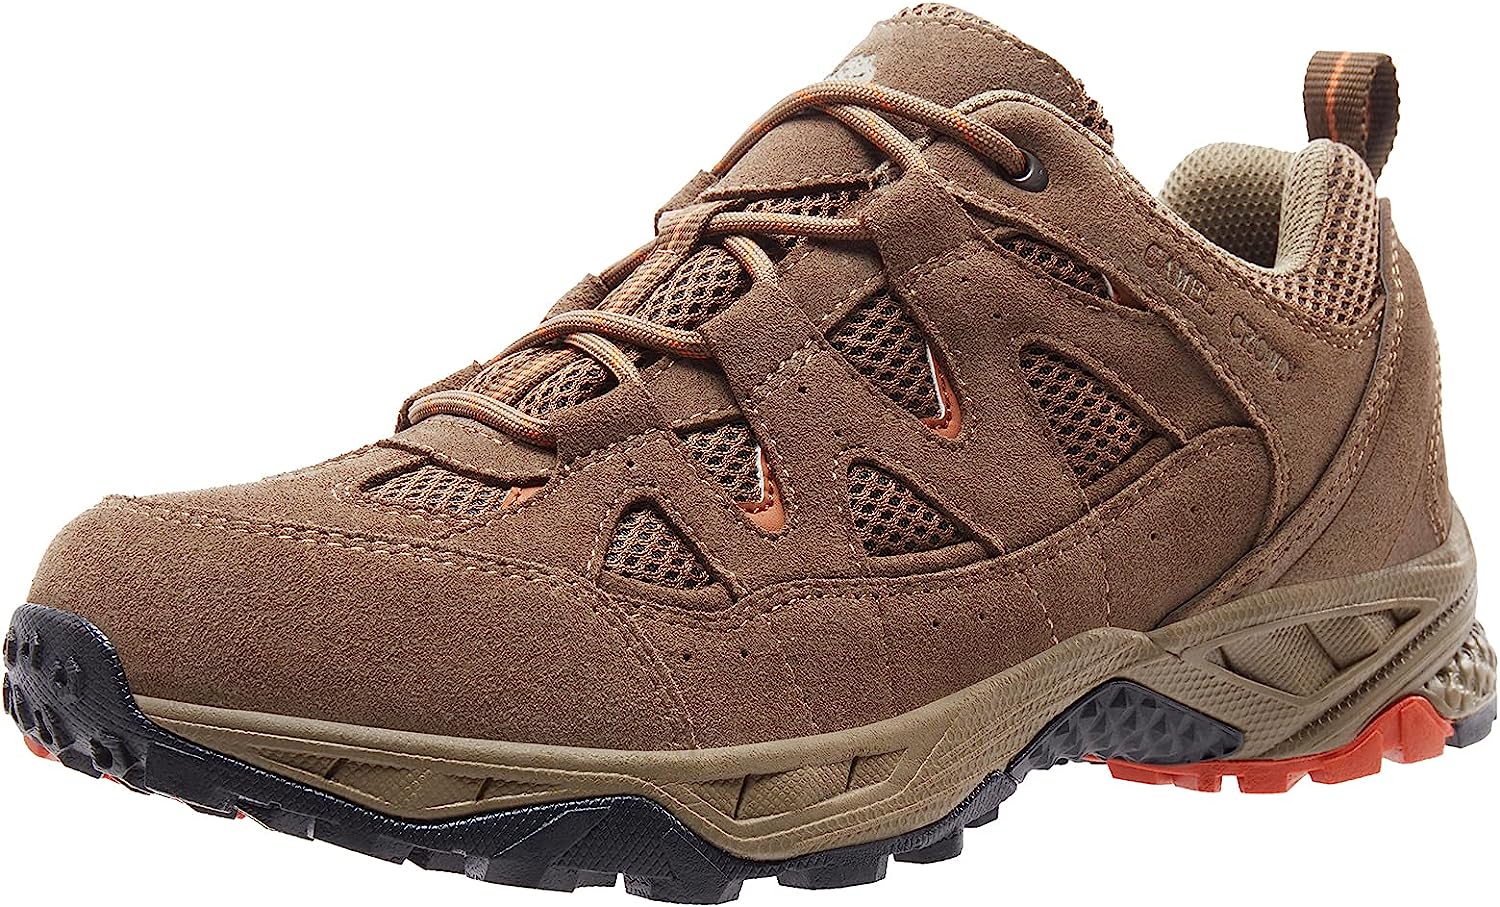 CAMEL CROWN Men's Hiking Shoes Leather Low Top [...]